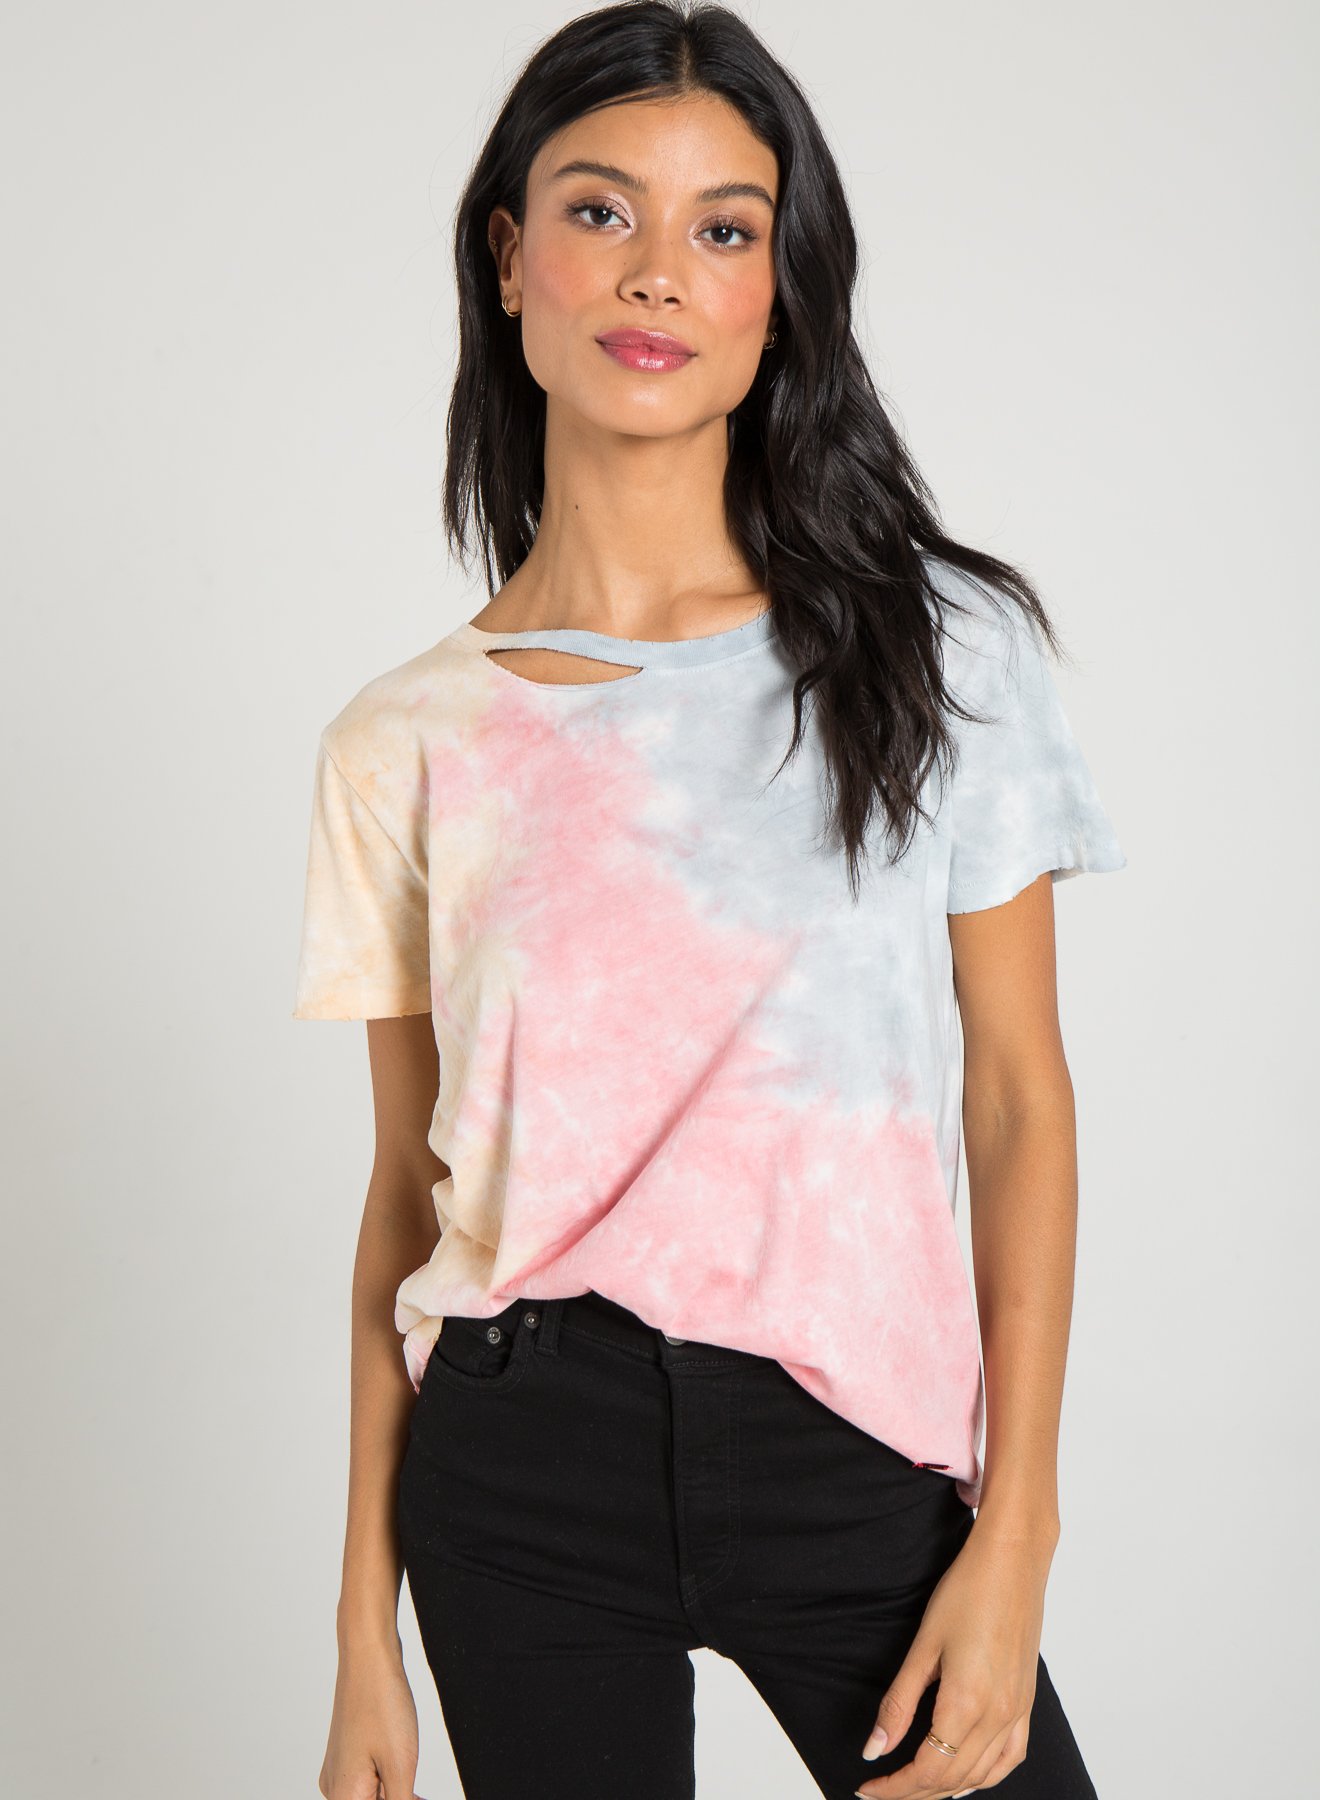 Where To Buy Taylor Swift Tie-Dye T-ShirtHelloGiggles